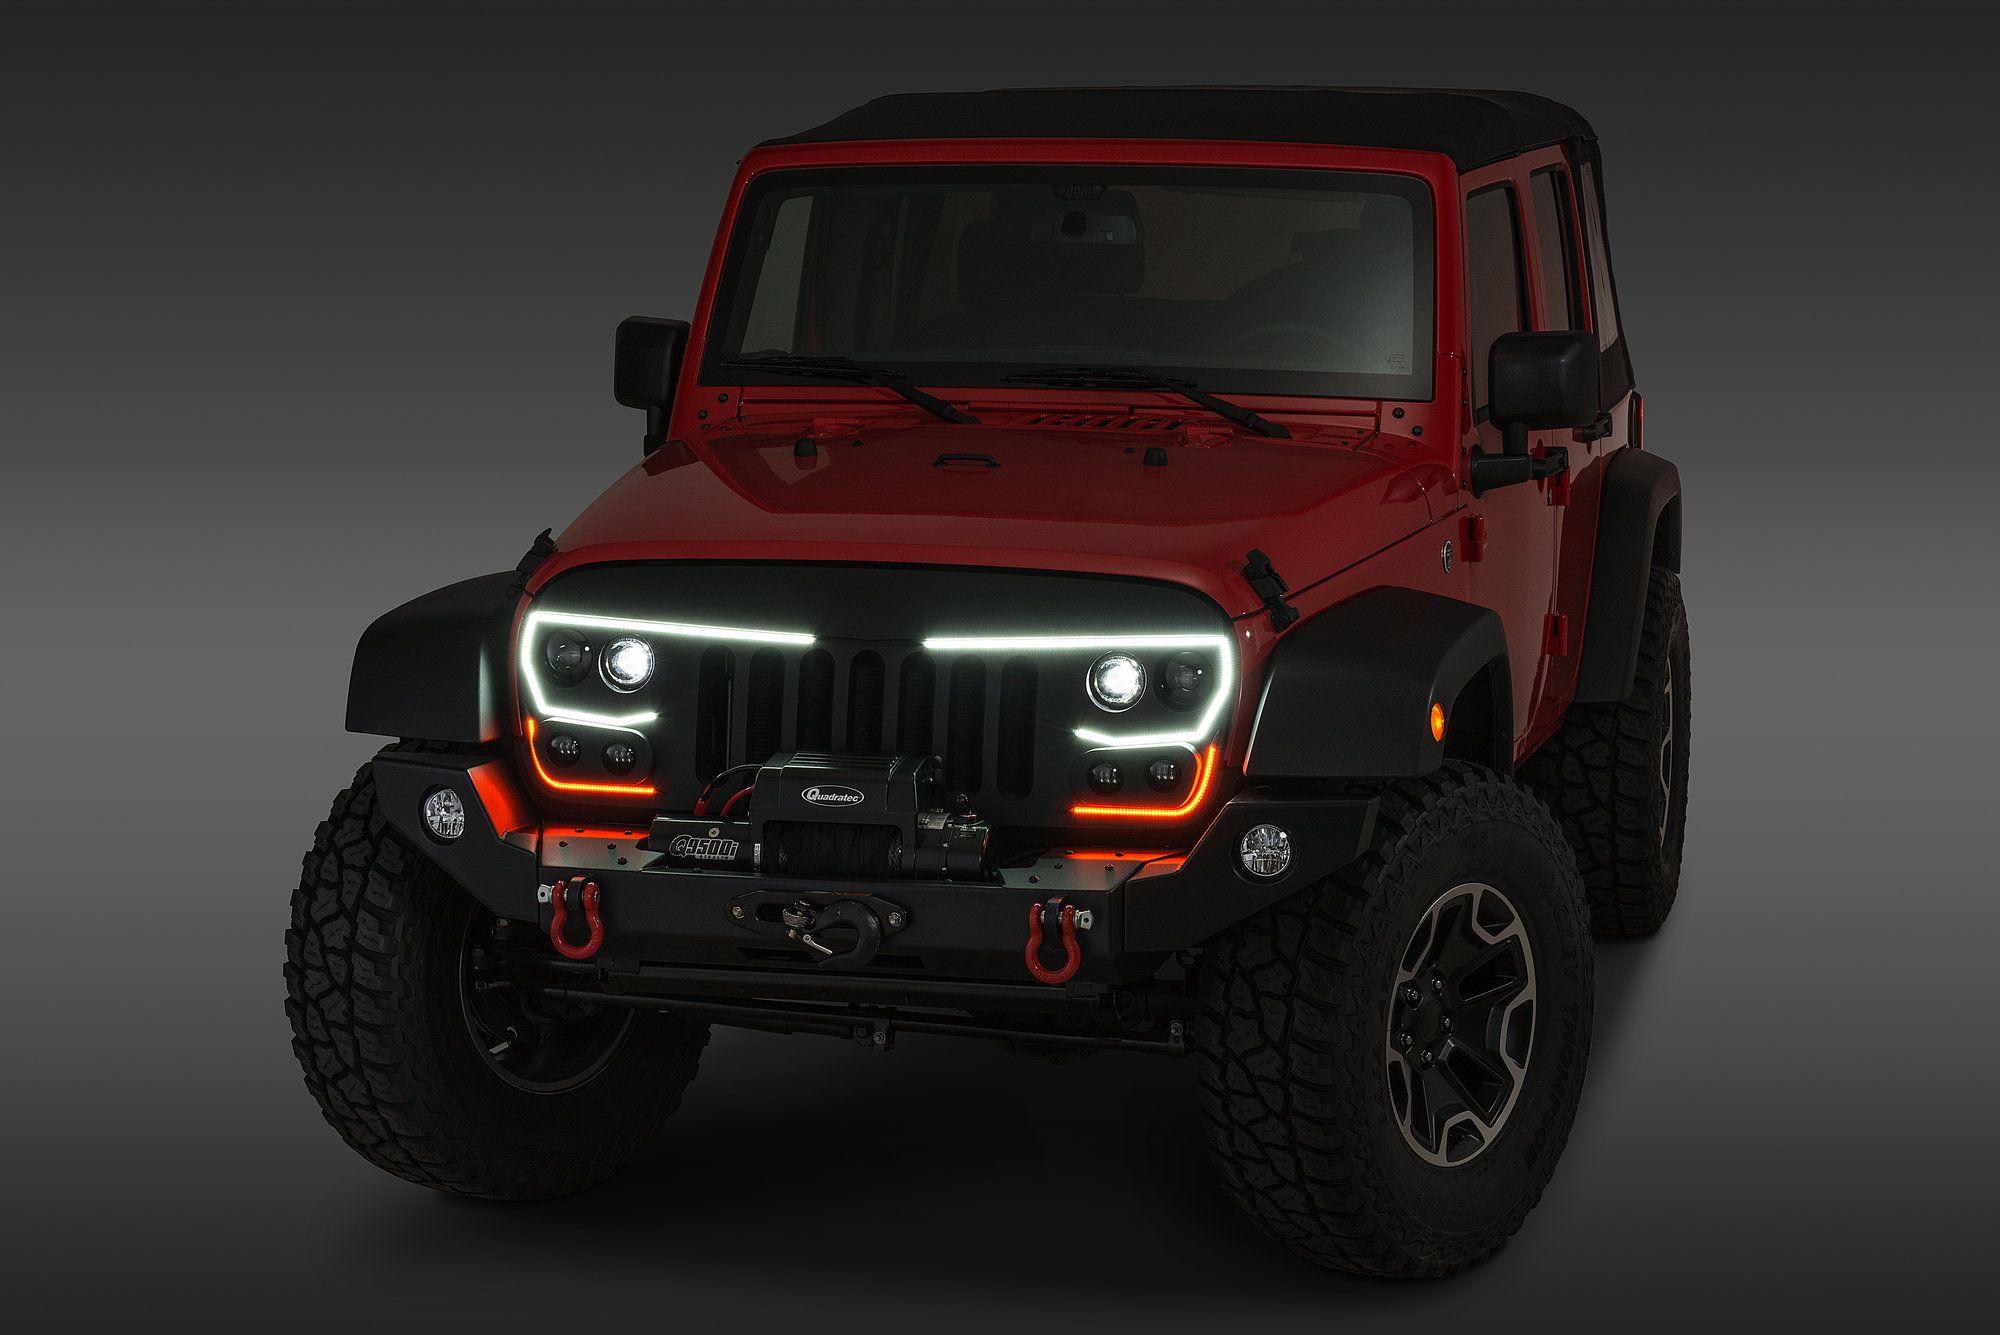 Jeep JK Grill Logo - Oracle Lighting 5817-504 Vector Grill for 07-18 Jeep Wrangler JK ...